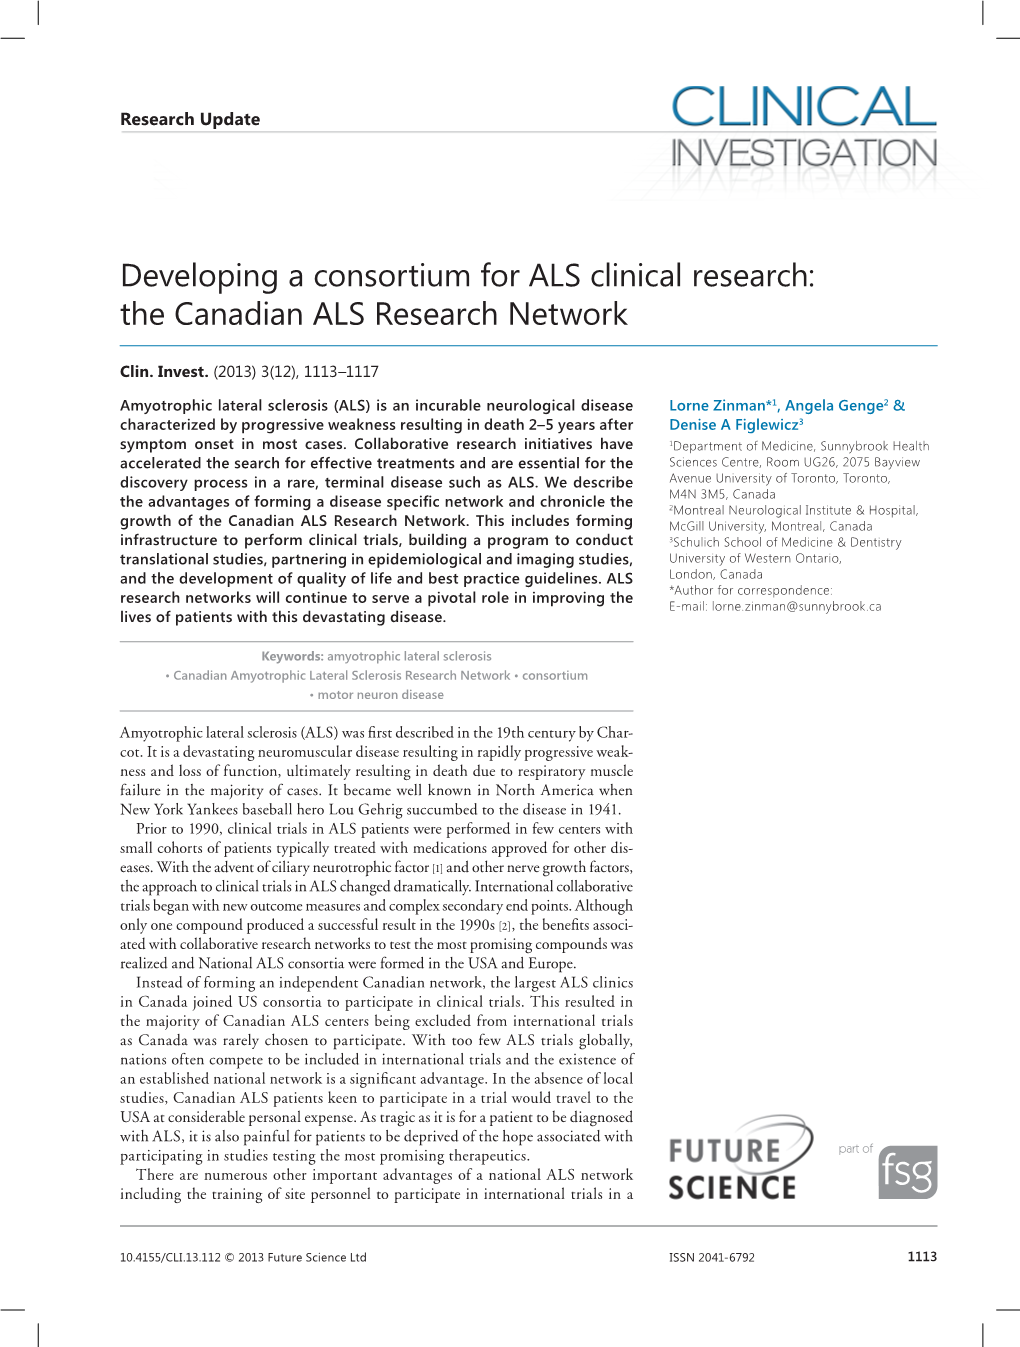 The Canadian ALS Research Network